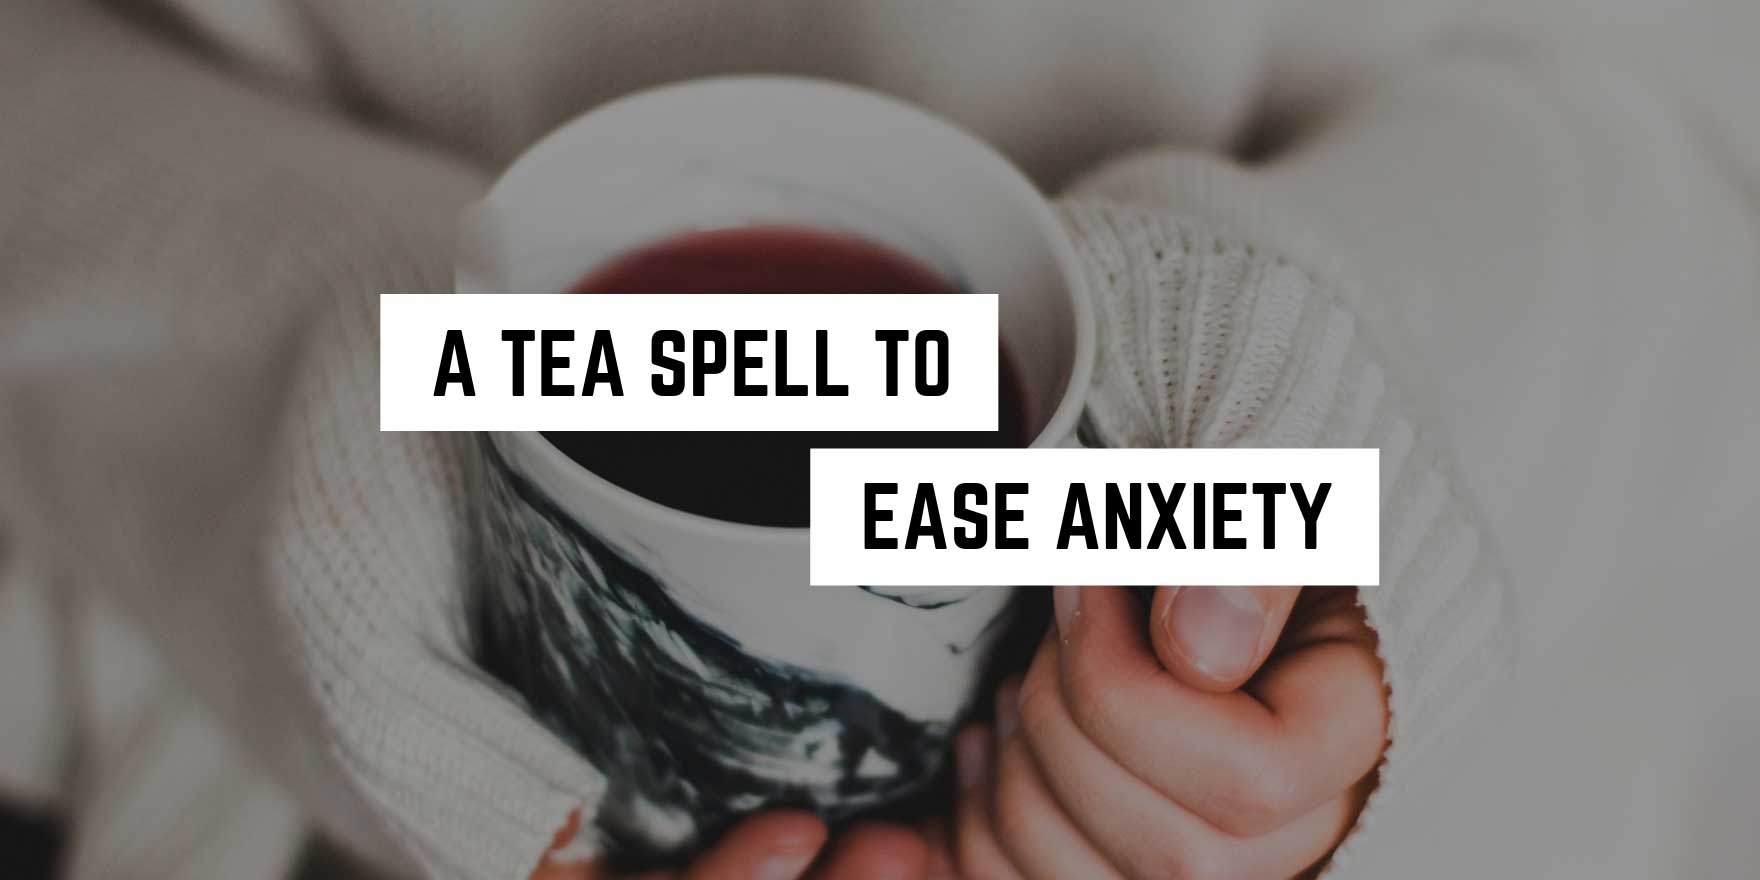 A Tea Spell to Ease Anxiety